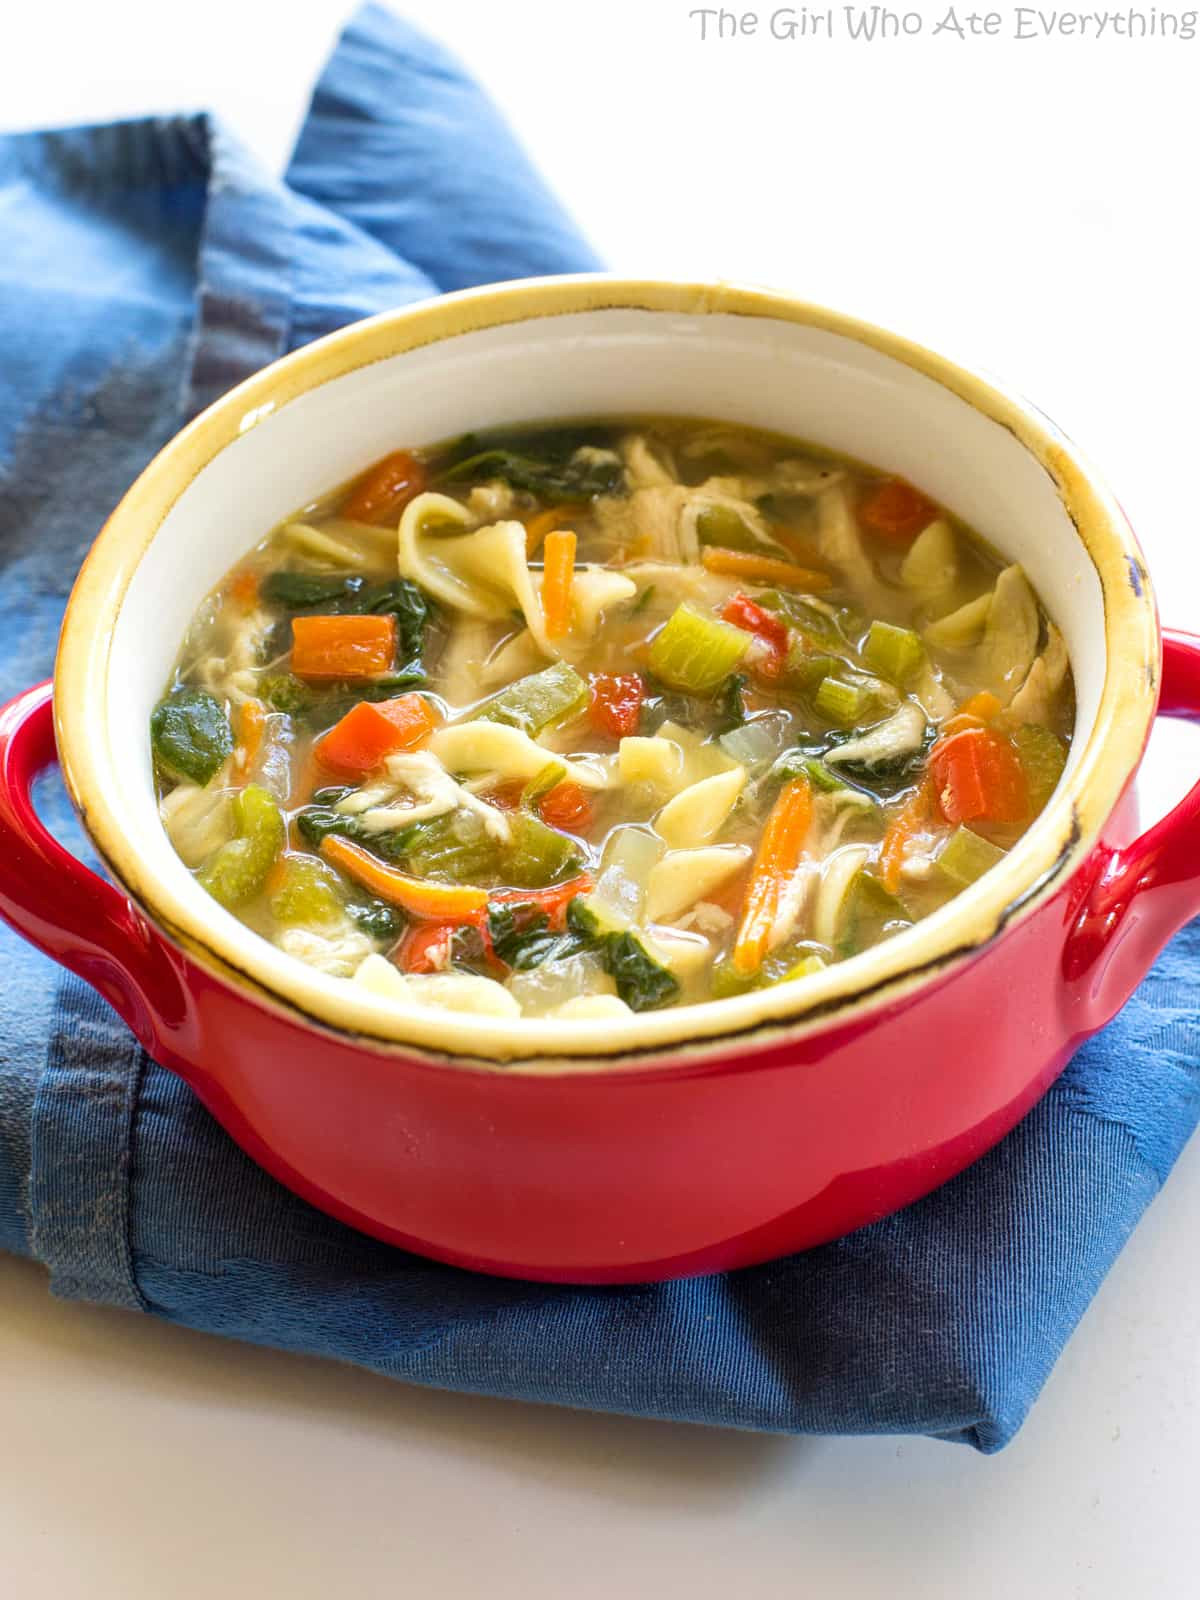 Healthy Chicken Vegetable soup Beautiful Healthy Ve Able Chicken soup the Girl who ate Everything